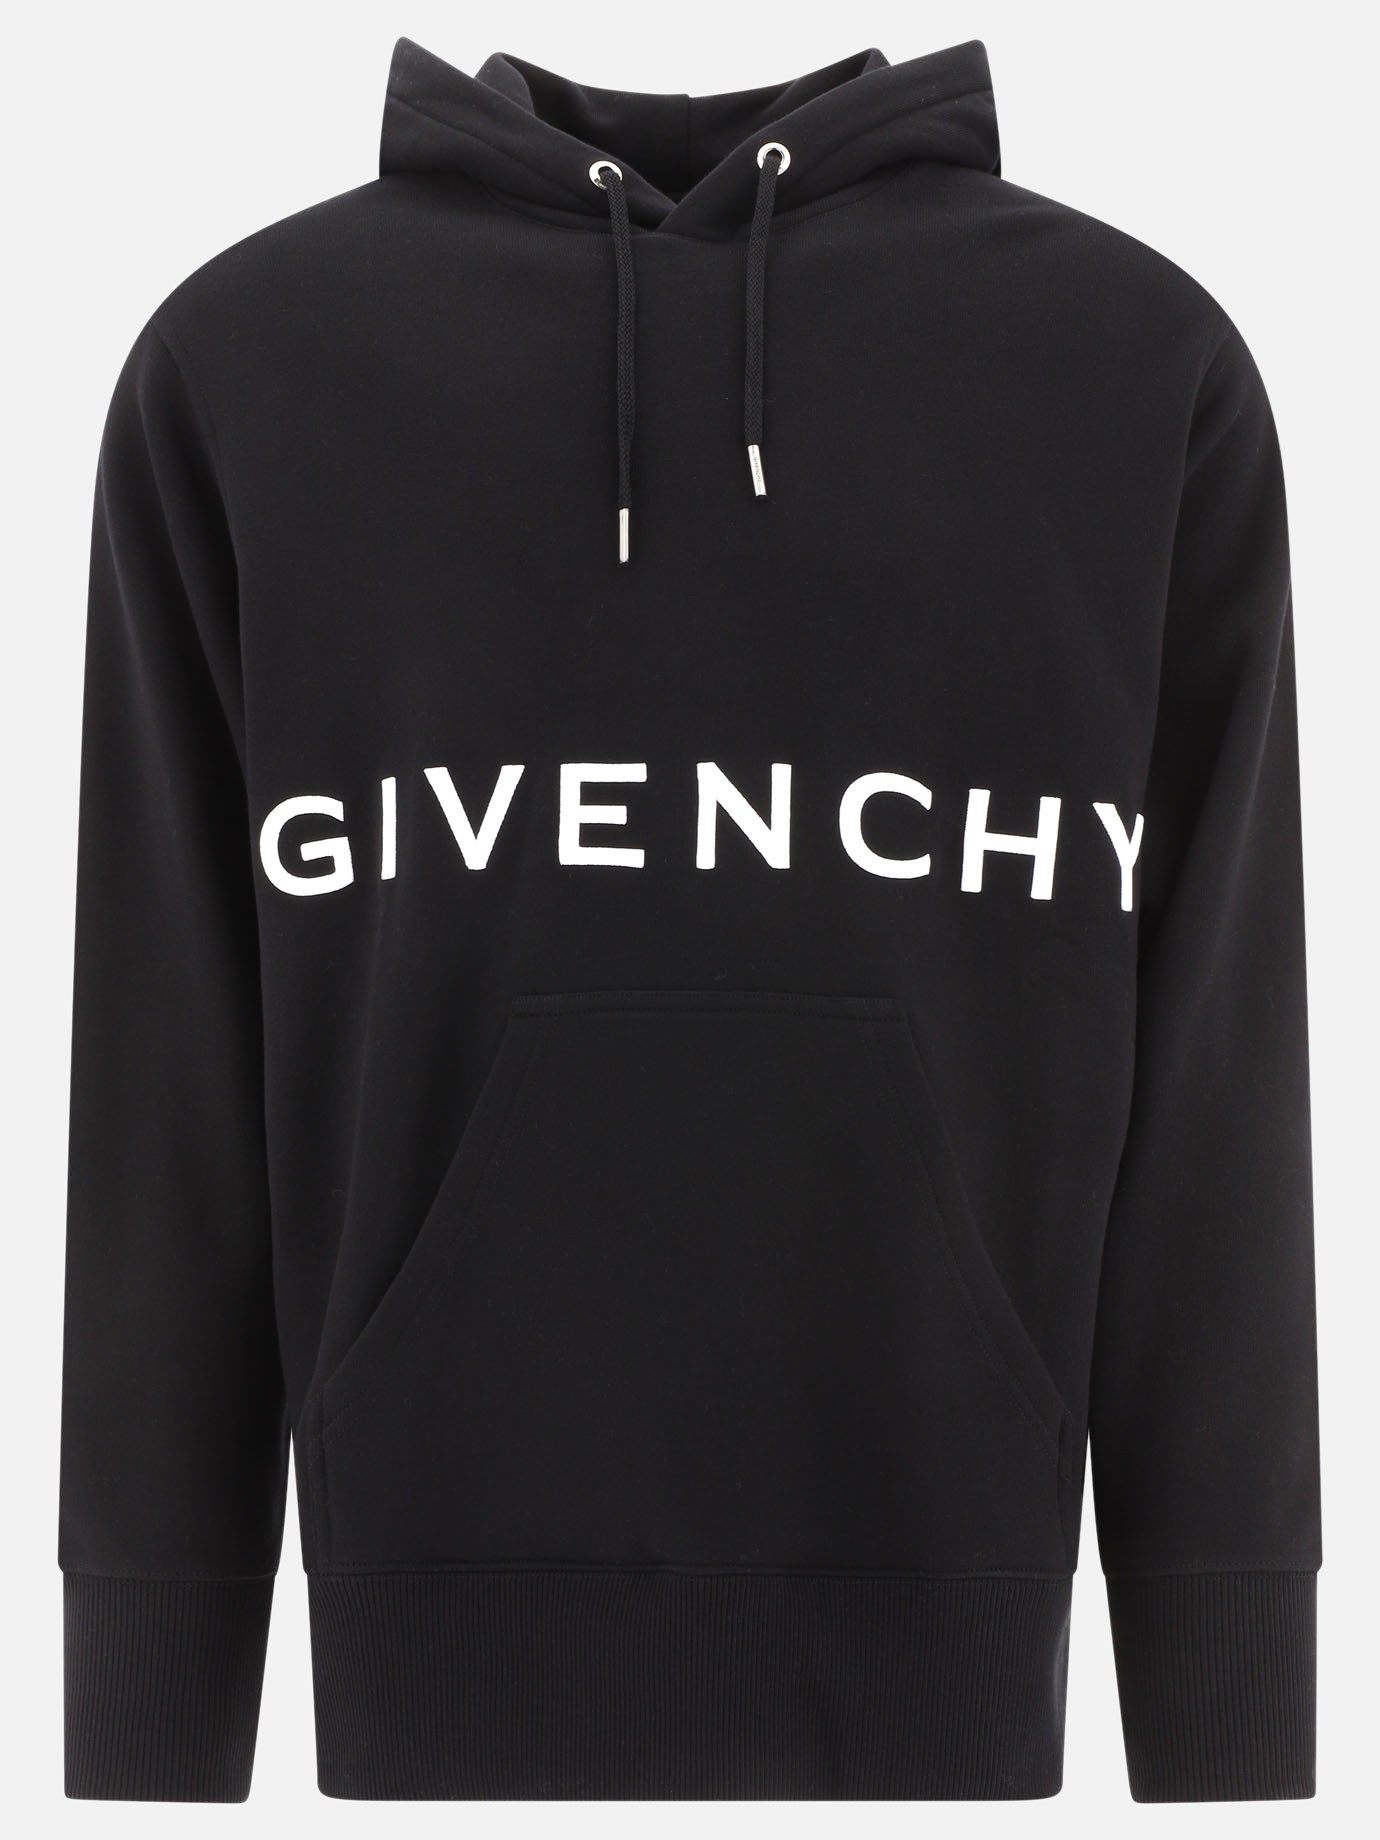  Givenchy 4G  sweatshirtby Givenchy - 1